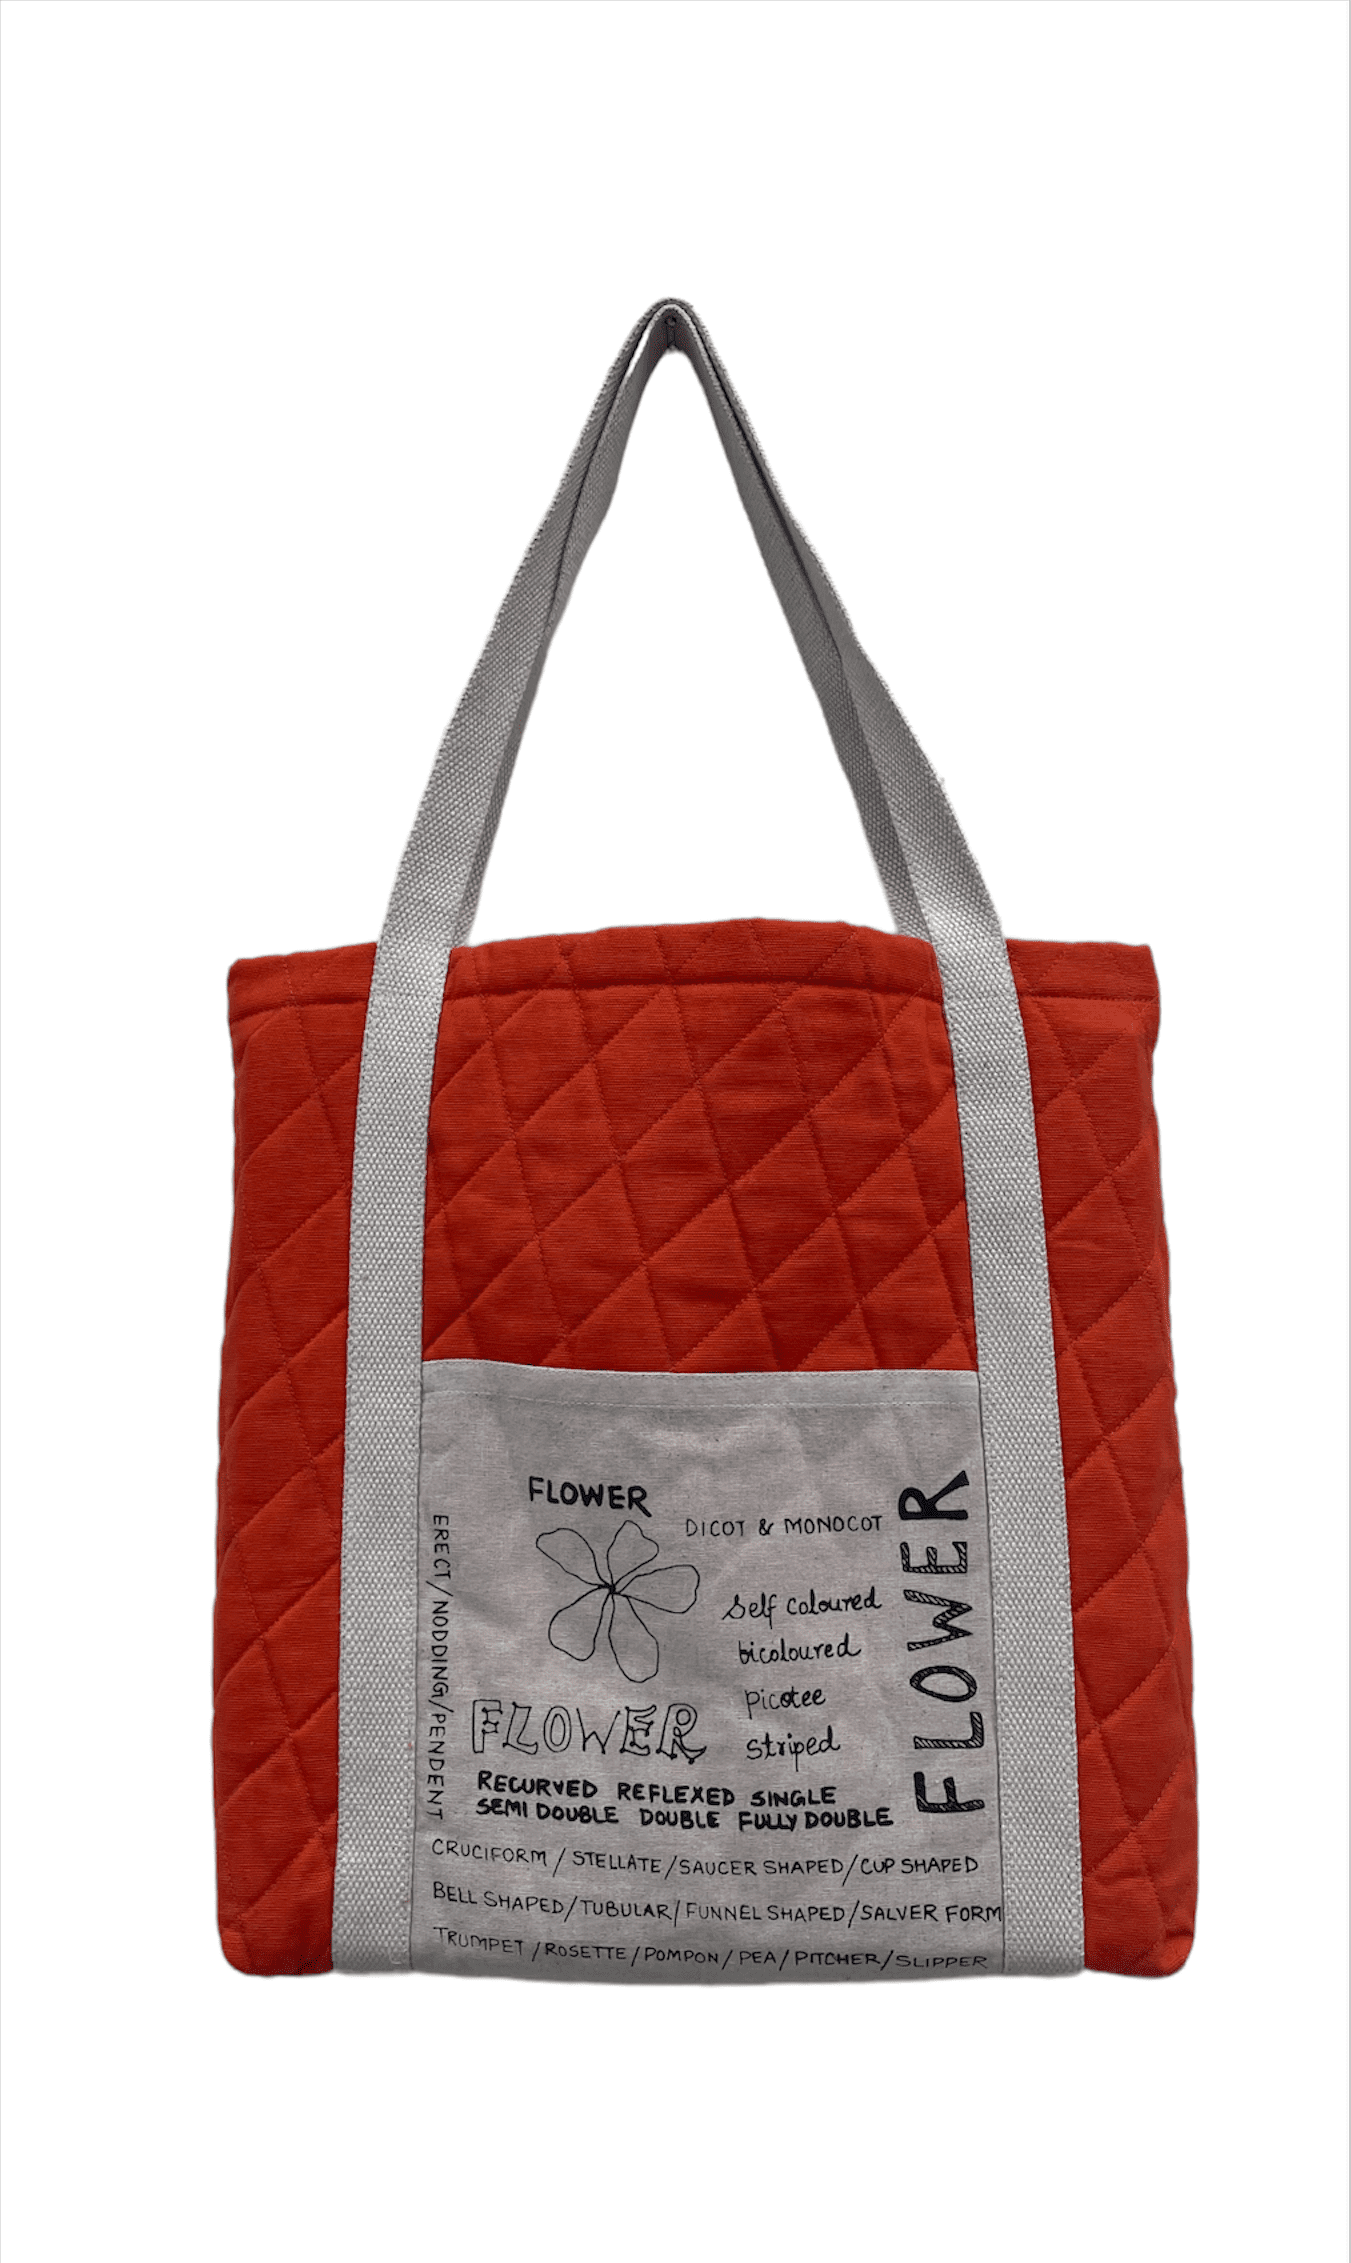 Tote Bag by IVillage Family | 100% Cotton Shopping Bag